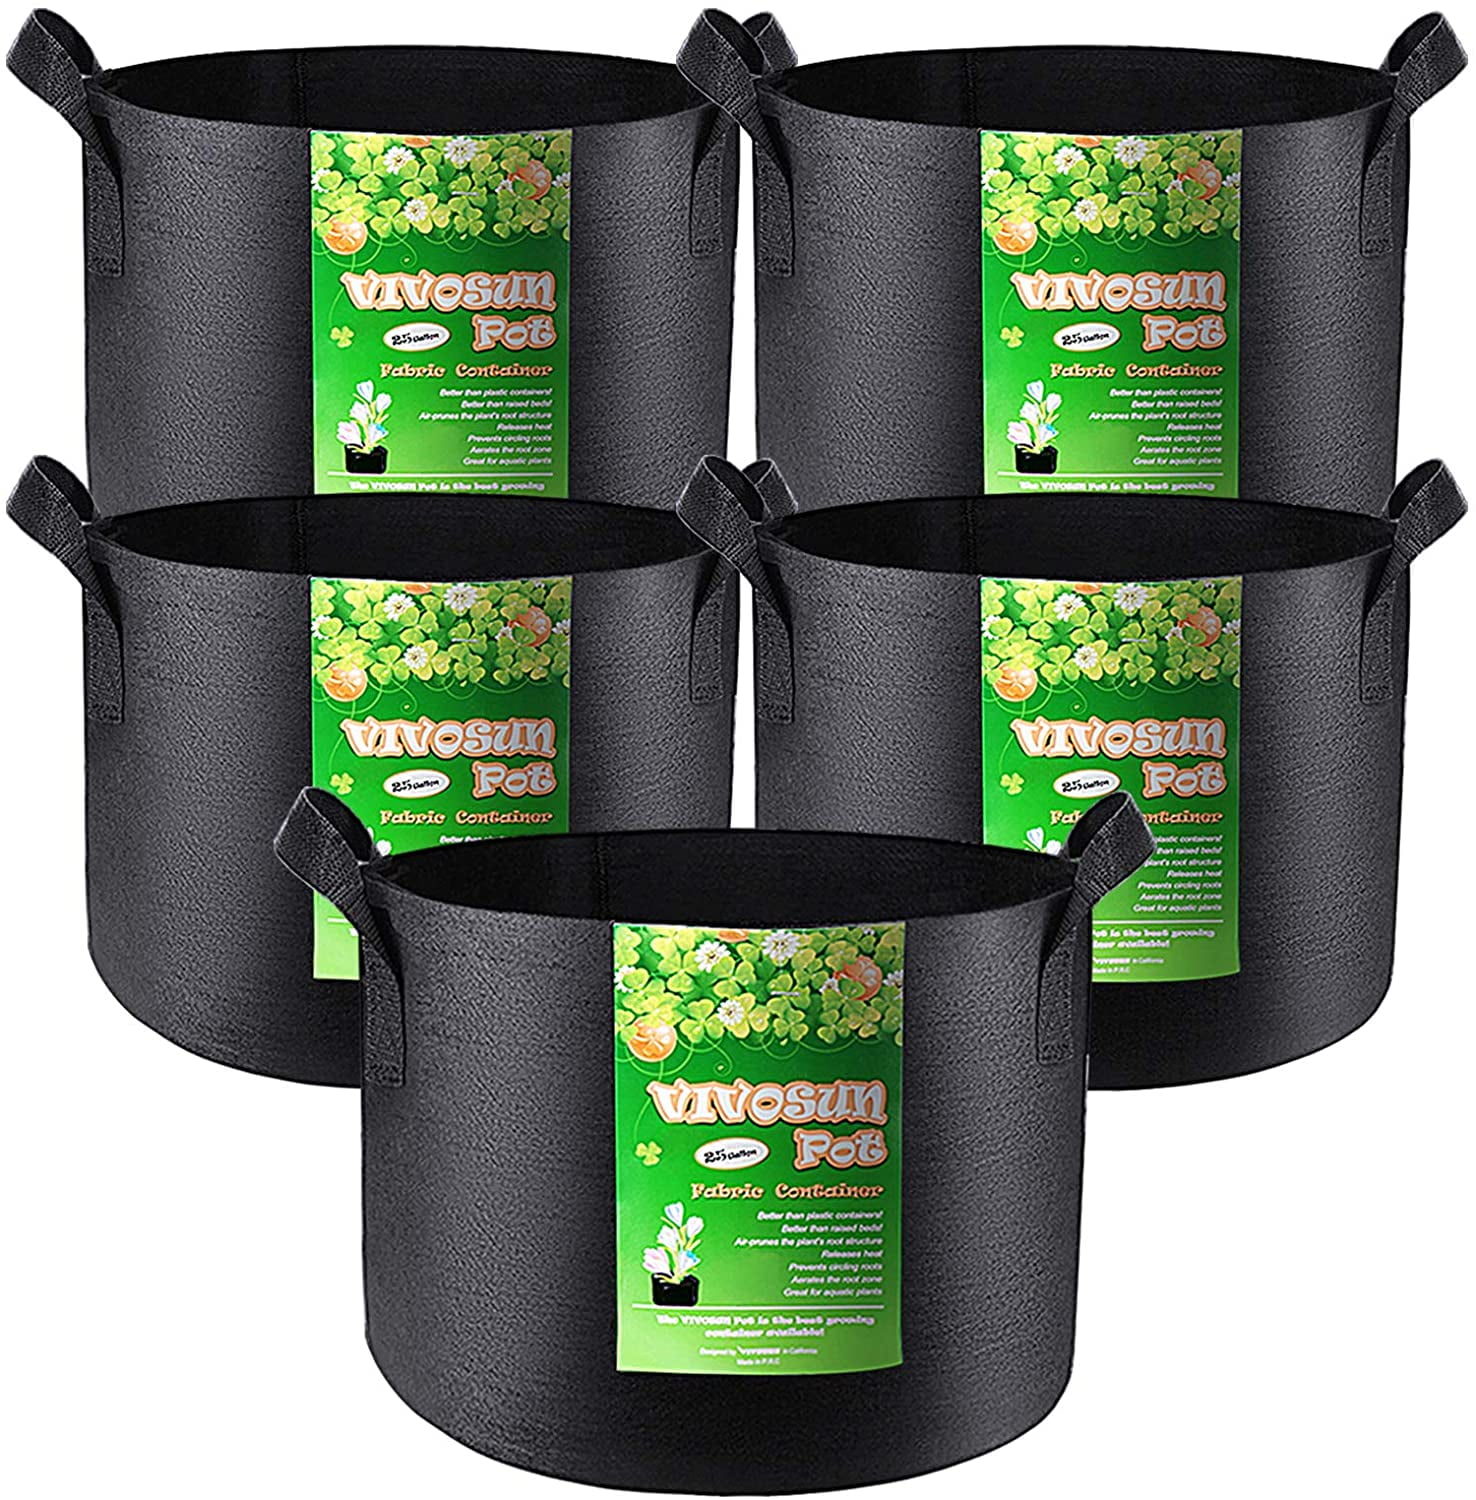 HAOWIN 7-Pack Colorful Plant Grow Bags, Thickest Fabric Pots 10 Gallon 7  Gallon 5 Gallon 3 Gallon Variety Size Pack, Plant Labels Included Potato